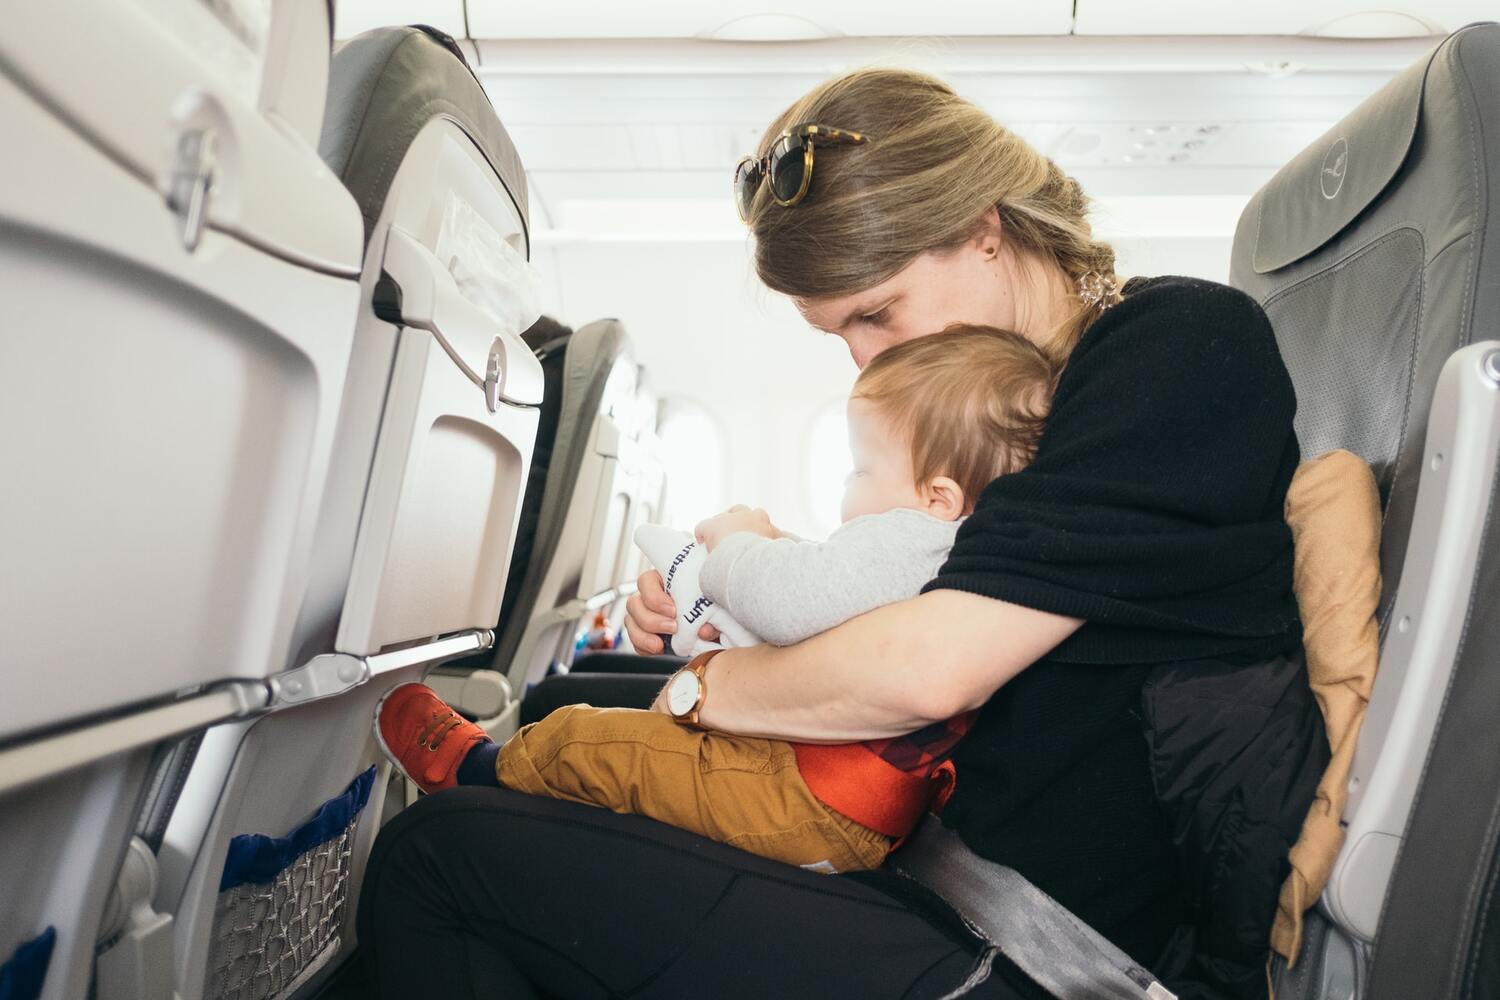 A Mom on a plane traveling with a baby.